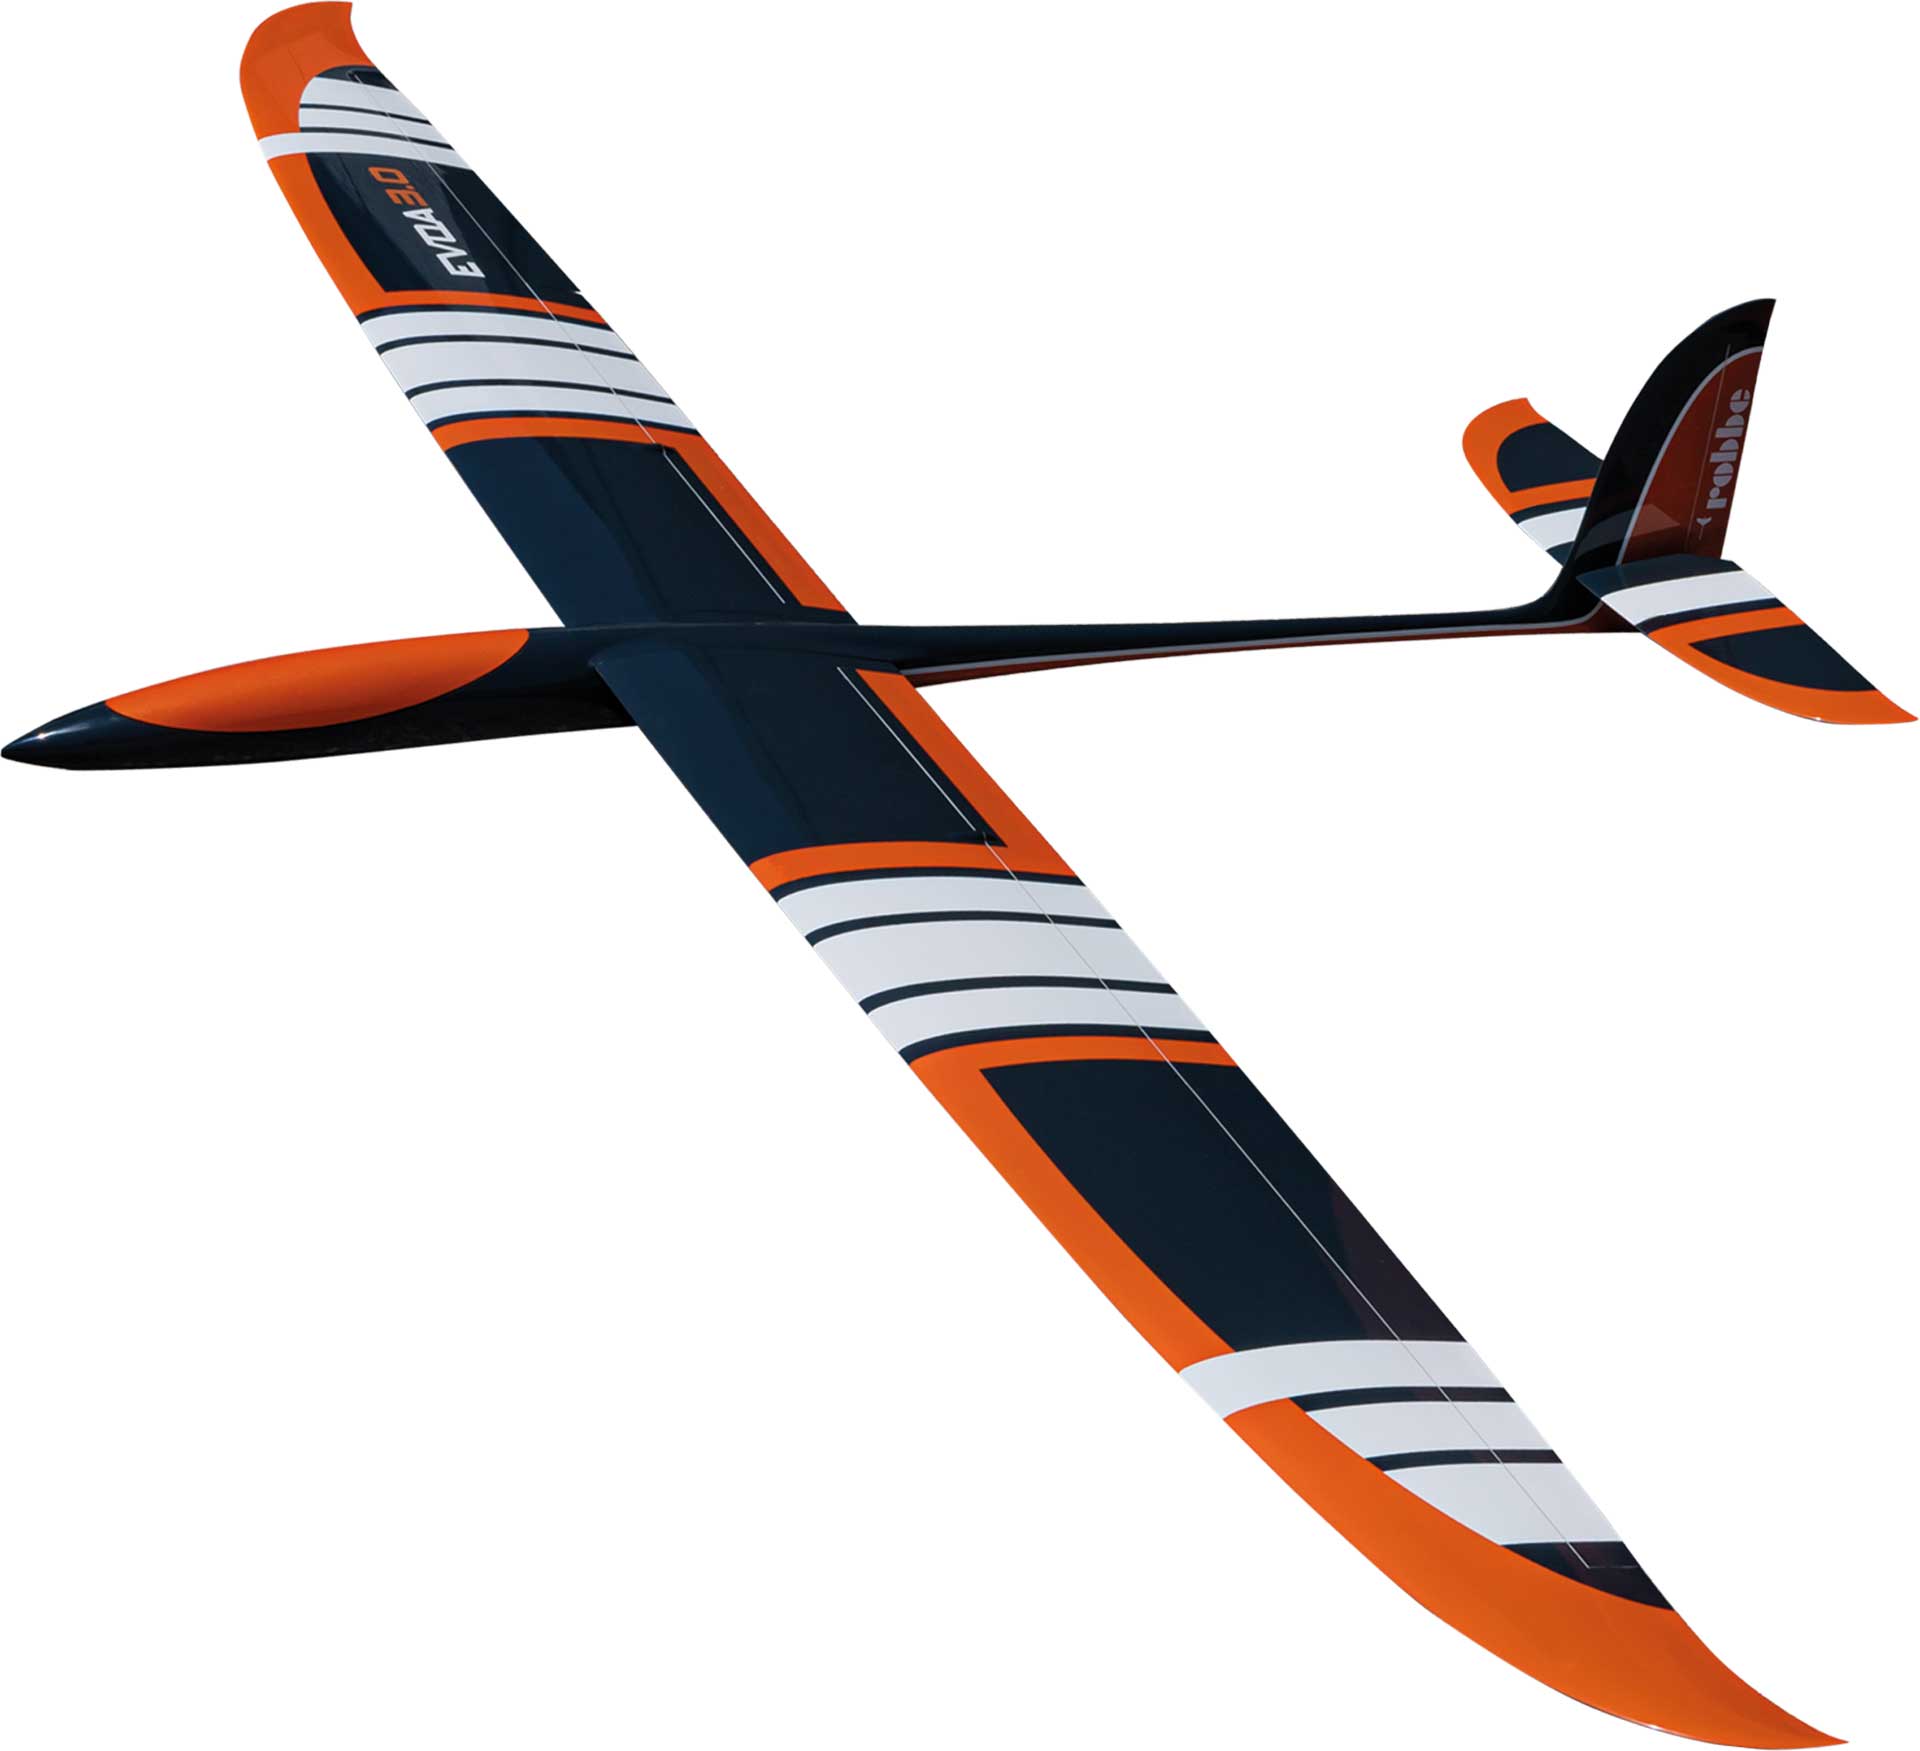 Robbe Modellsport EVOA 3.0 PNP VOLL-GFK "Sailor" HIGH PERFORMANCE GLIDER WITH 4-FLAP WING